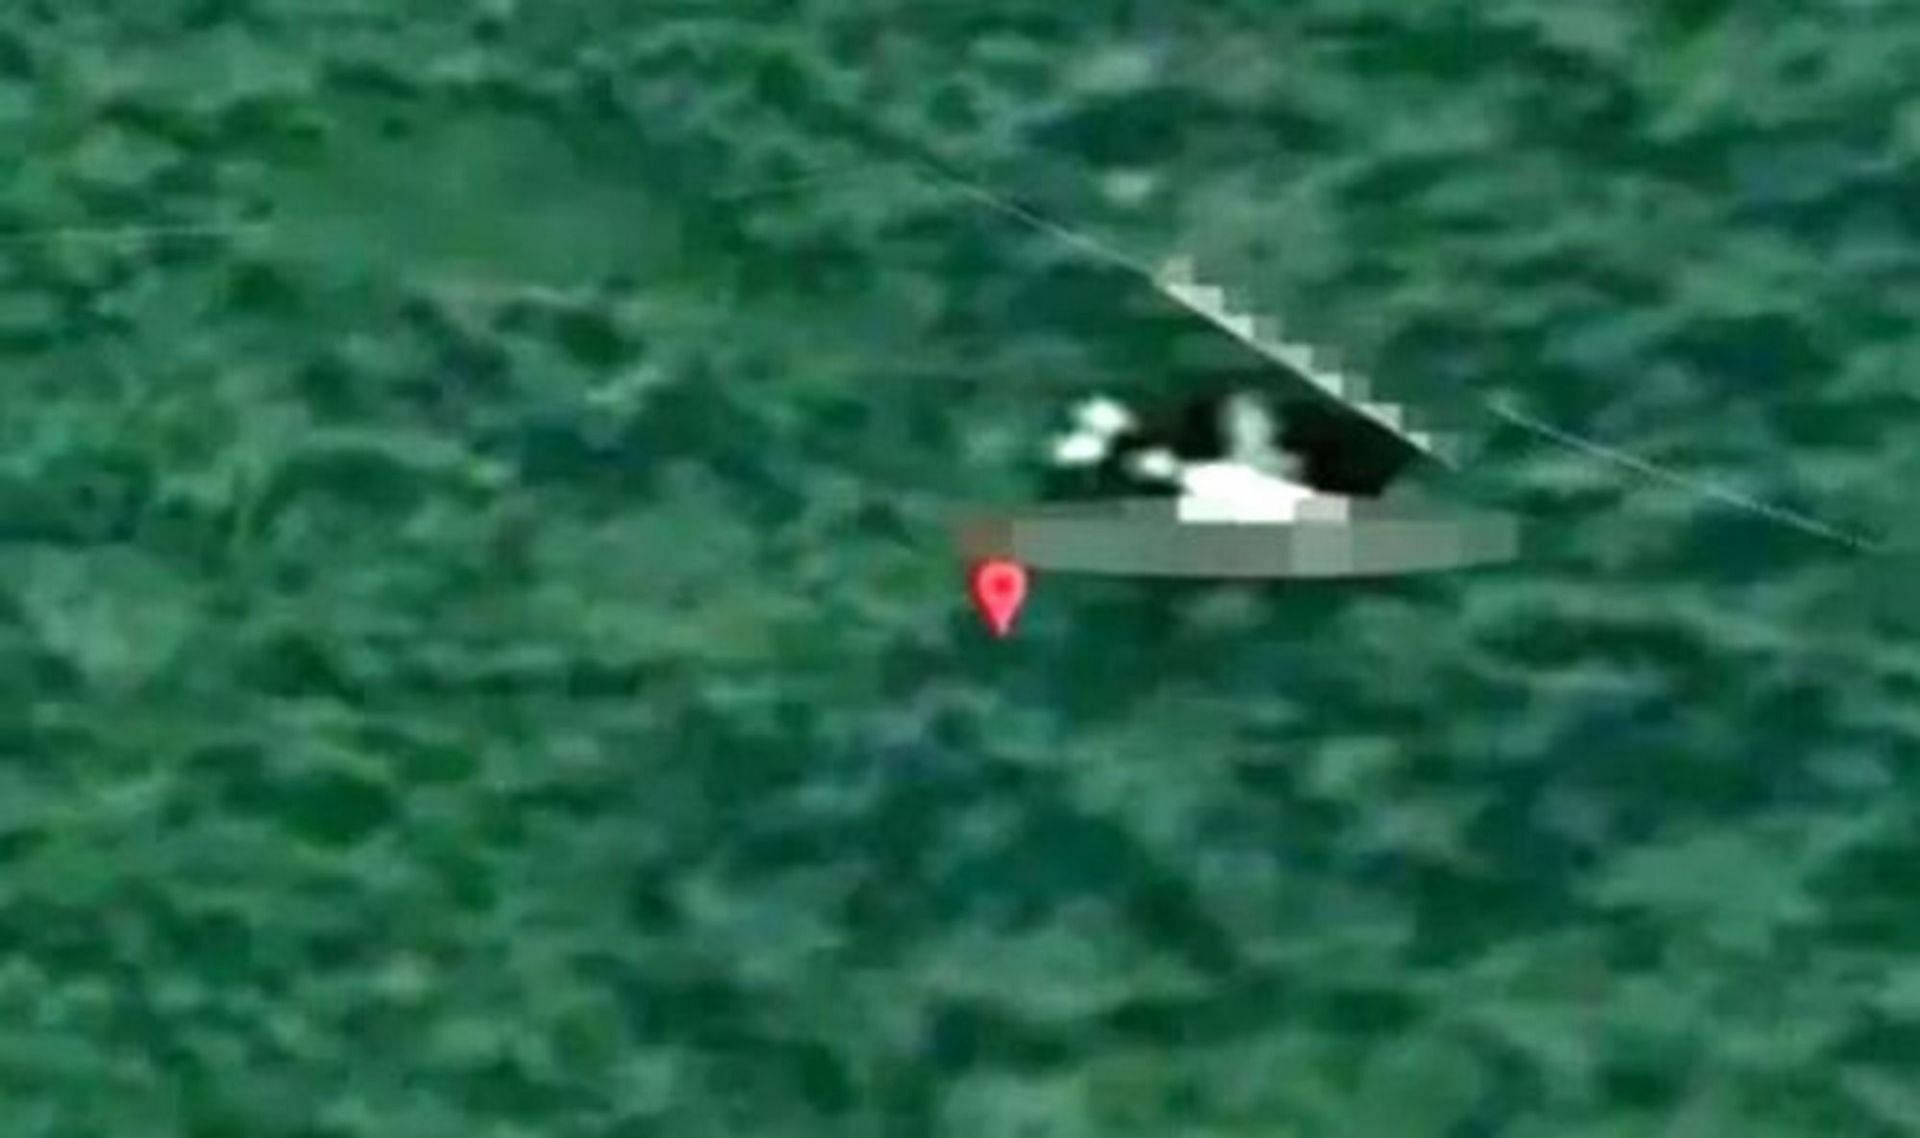 Claims of MH370 plane being found in Cambodian jungle debunked (Image via choquei/Twitter)